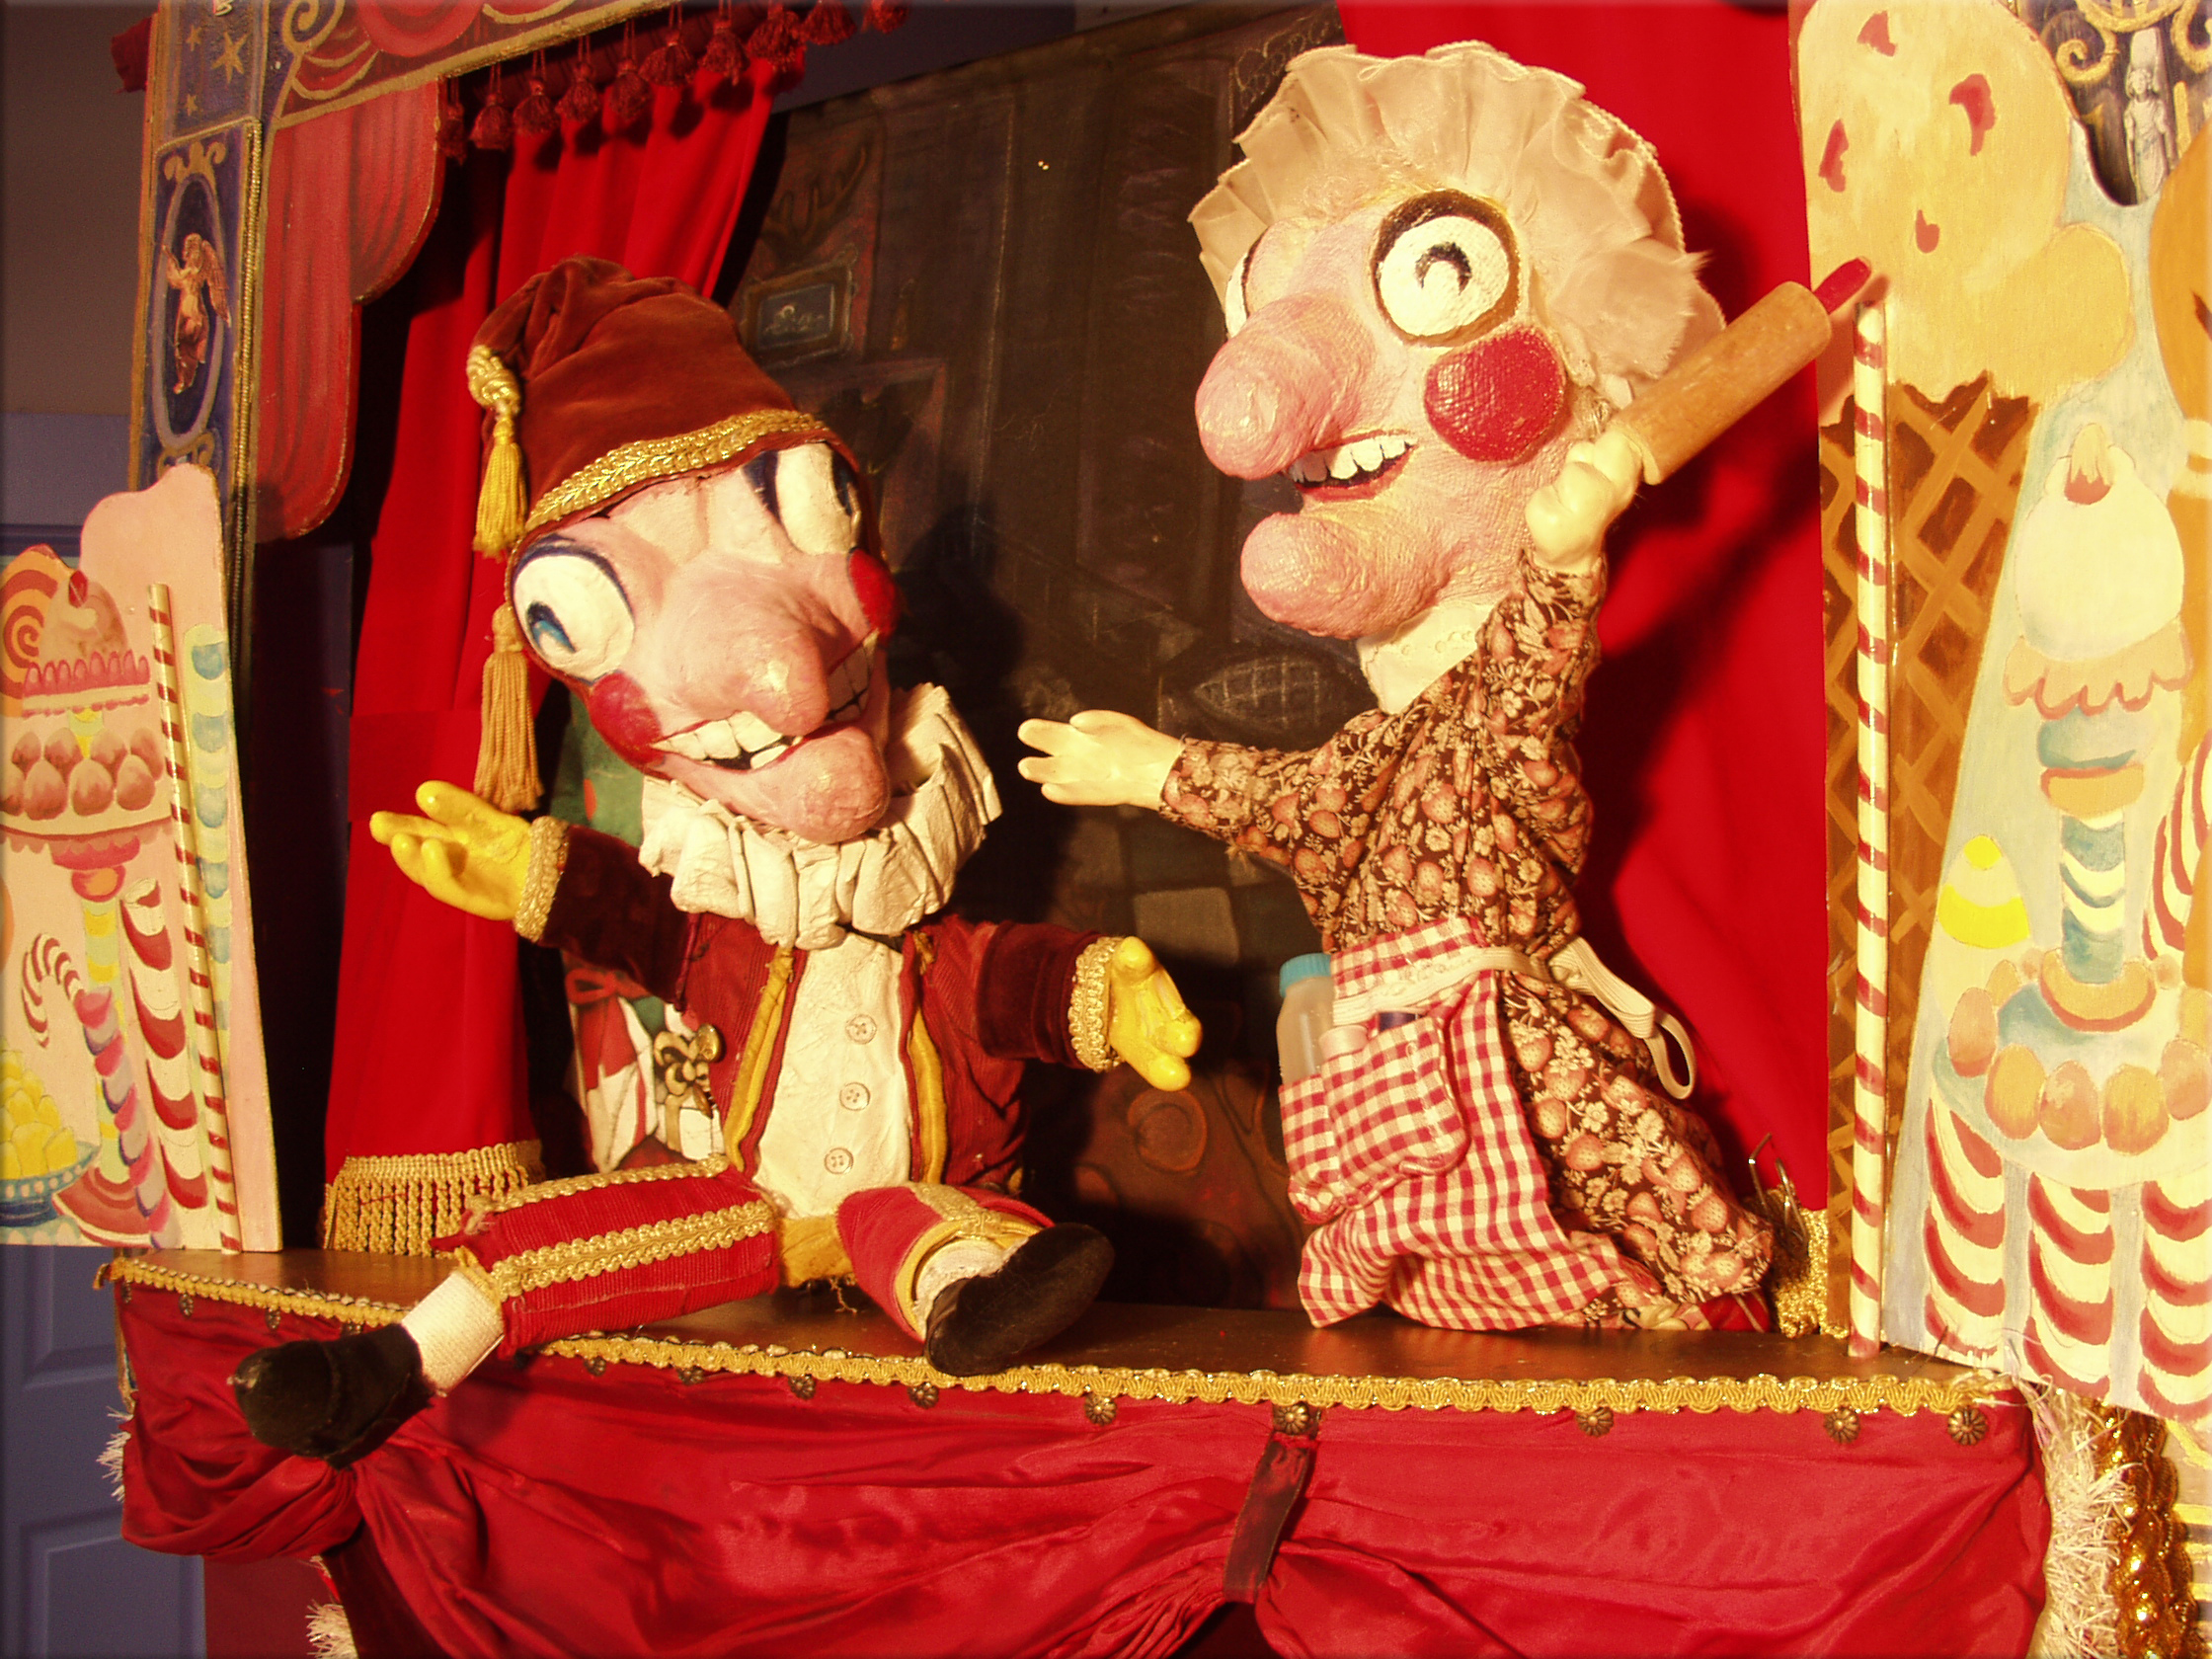 Puch and Judy Show: Mr. Punch and his wife, Judy.